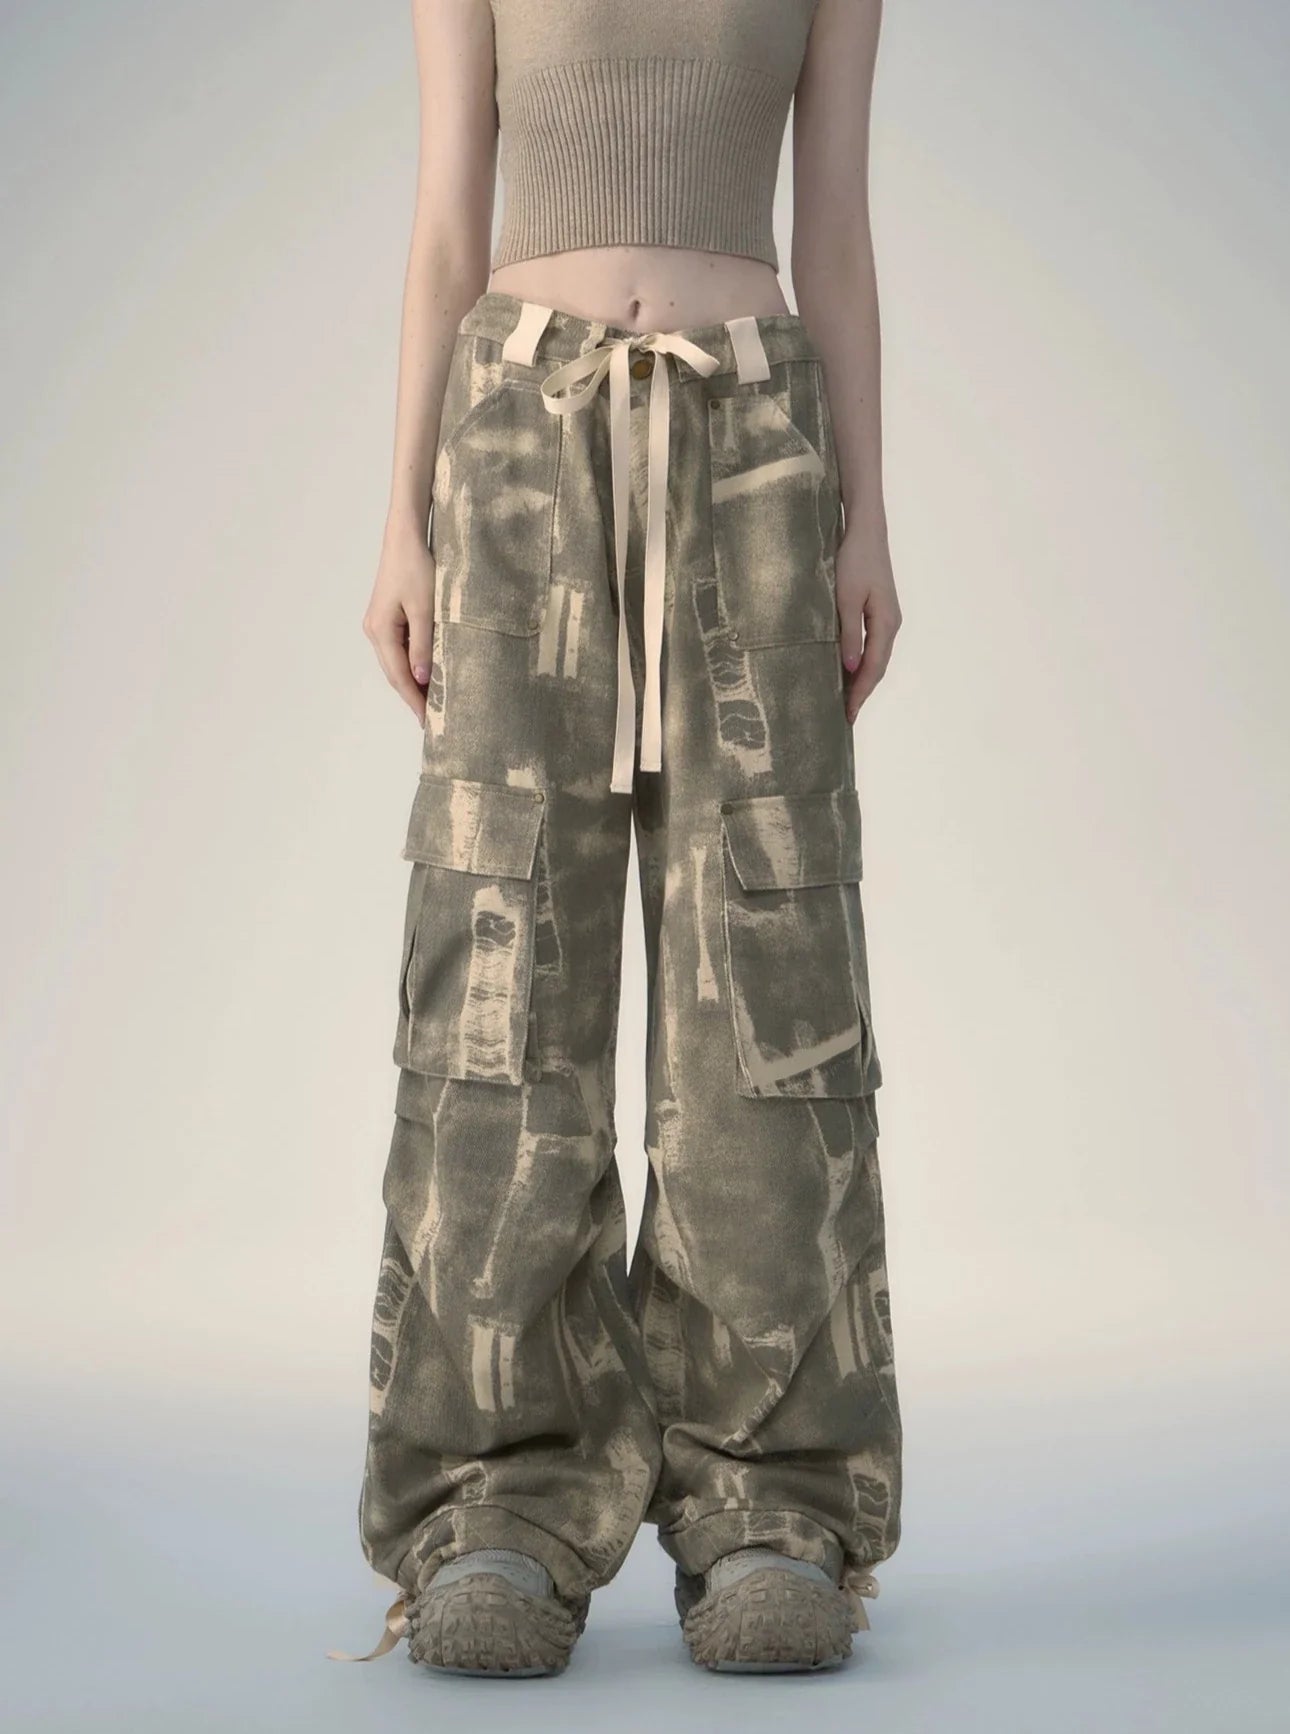 American Street Lace-Up Loose Camouflage Cargo Pants - chiclara